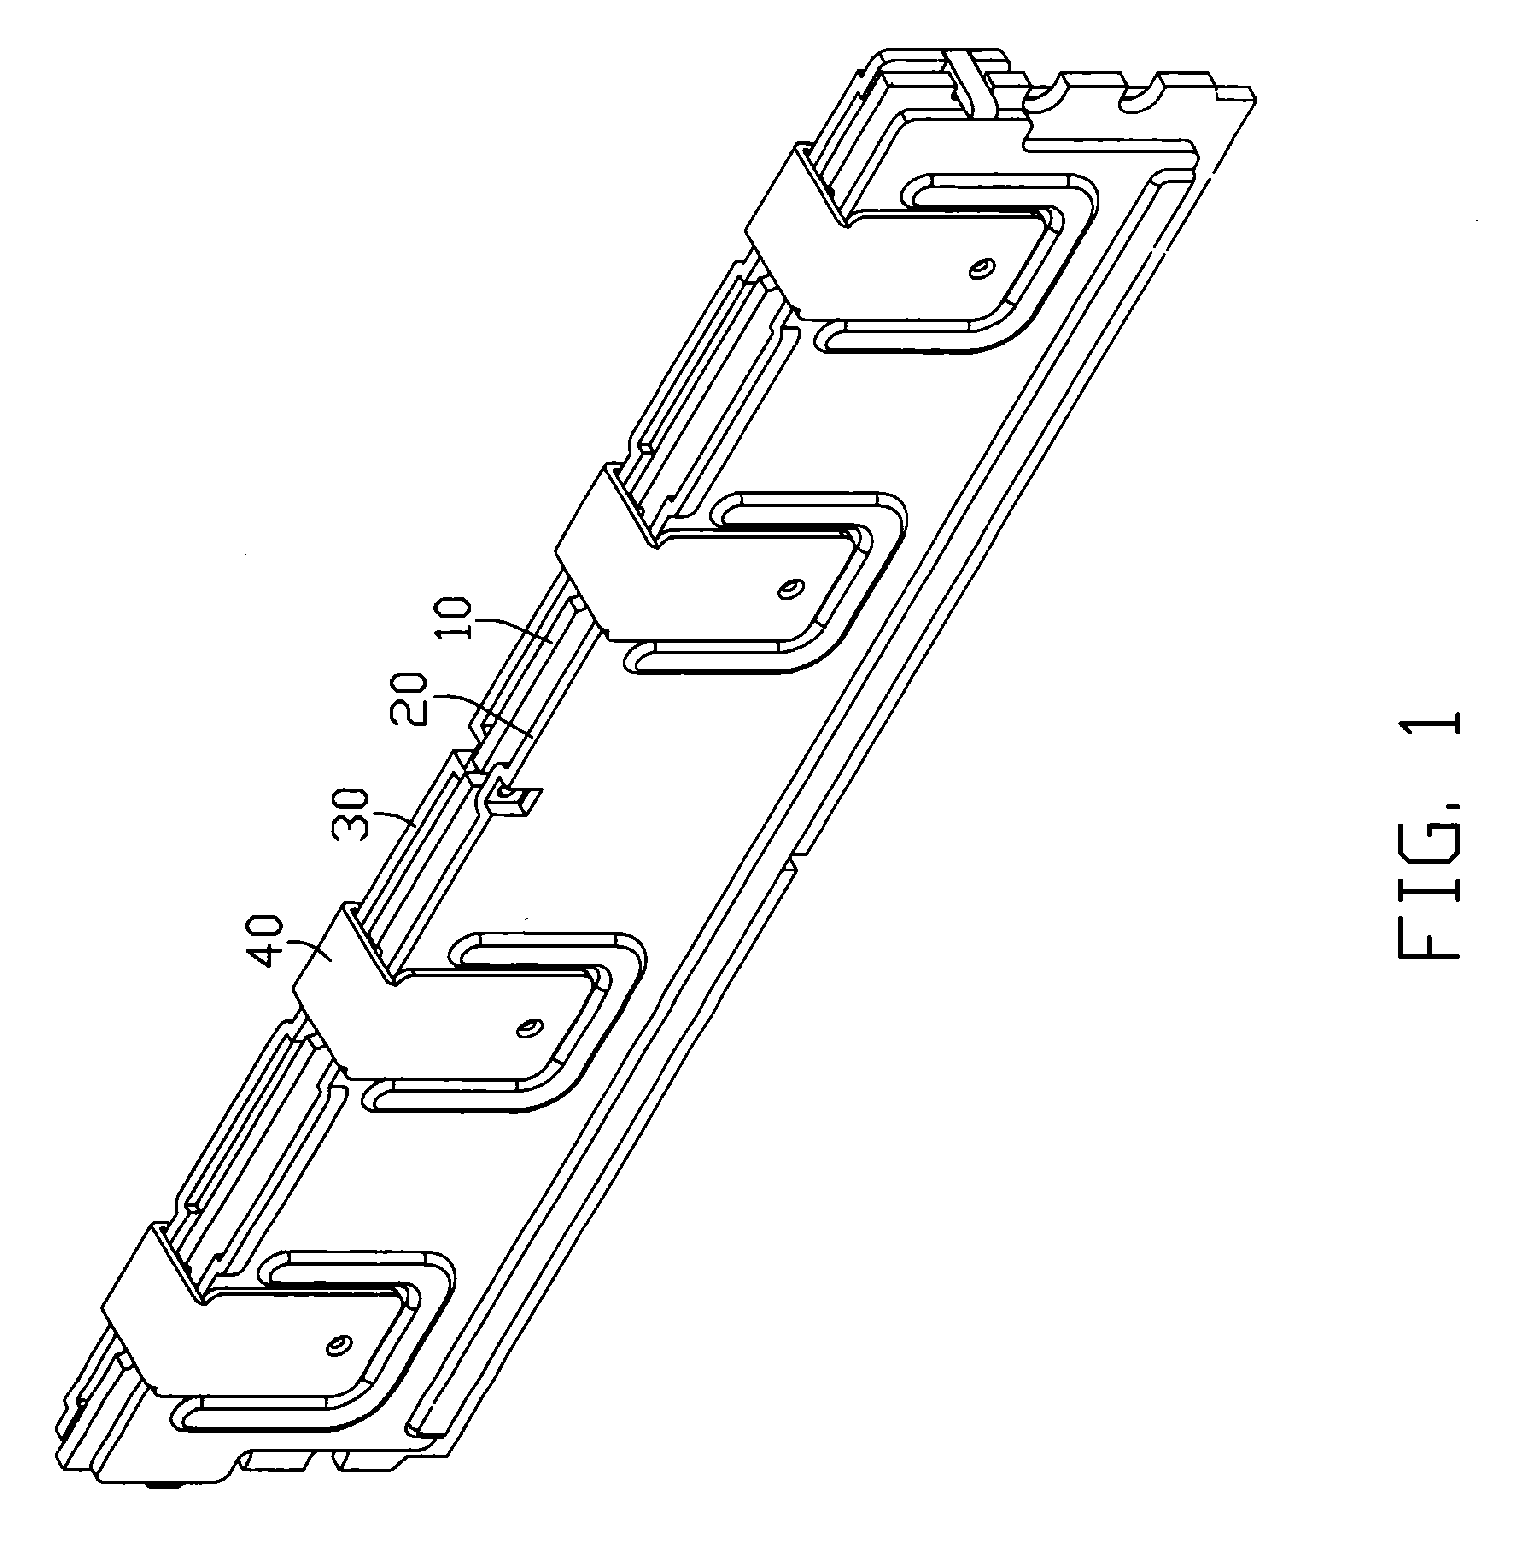 Memory module assembly including a clamp for mounting heat sinks thereon